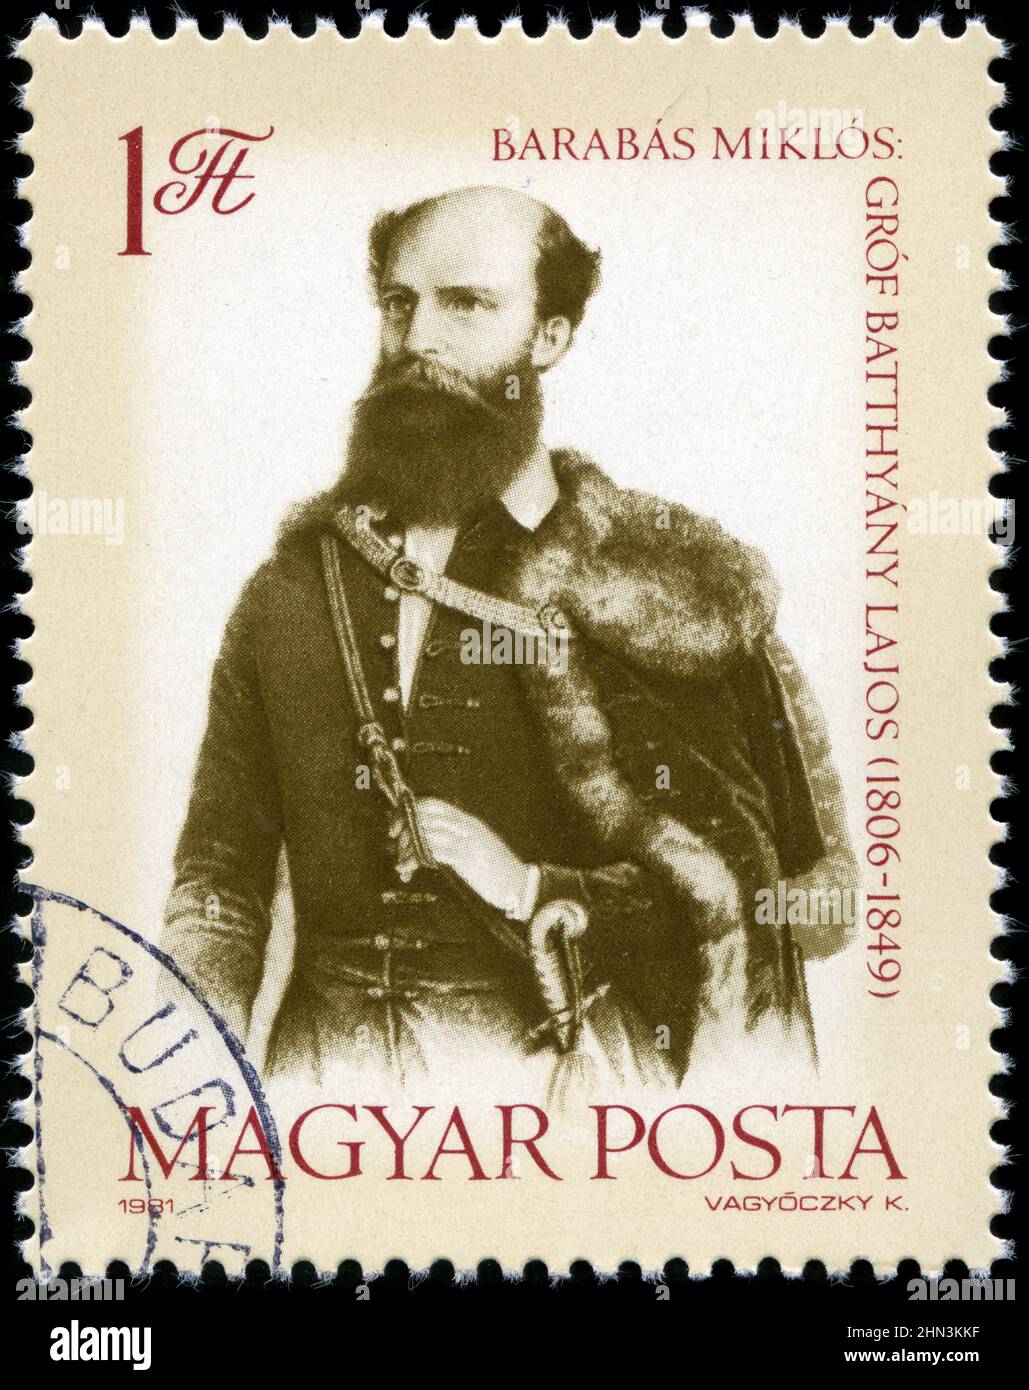 Postage stamp from Hungary in the Personalities series issued in 1981 Stock Photo